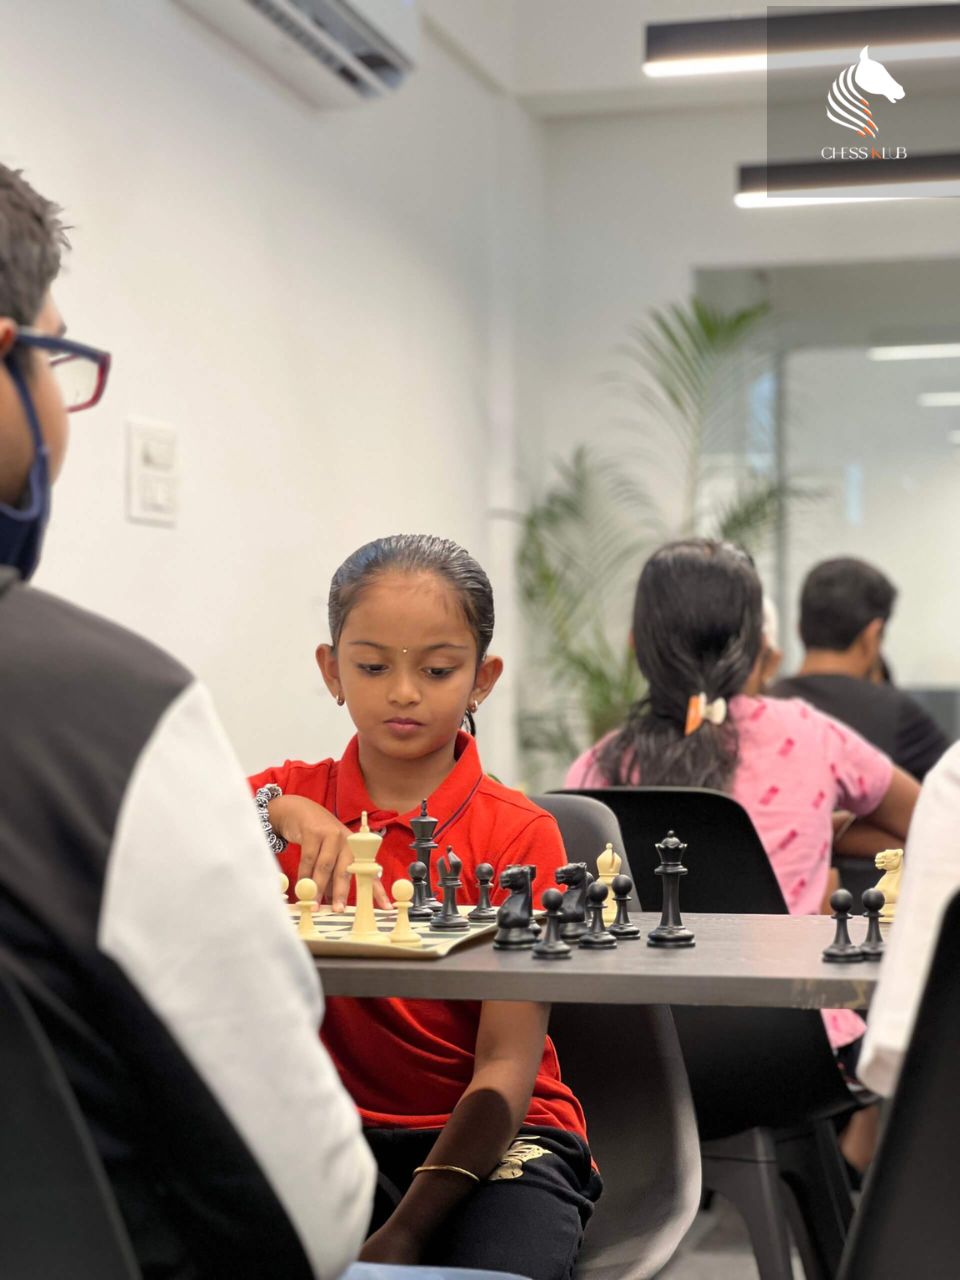 CHESS KLUB - Chess Coaching for Students and Kids